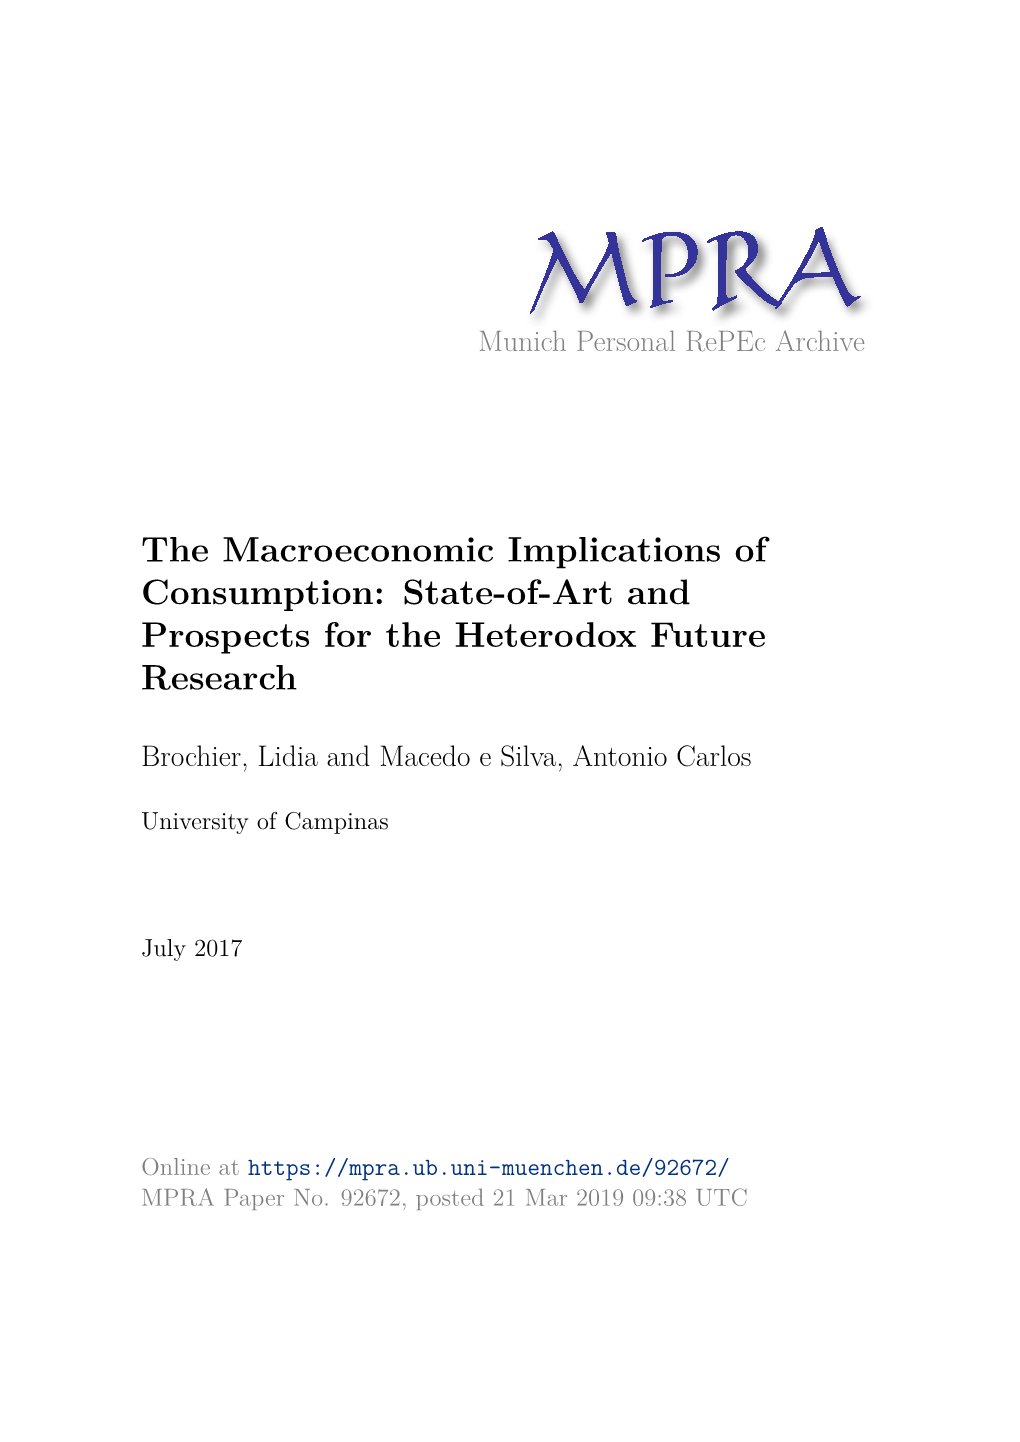 The Macroeconomic Implications of Consumption: State-Of-Art and Prospects for the Heterodox Future Research